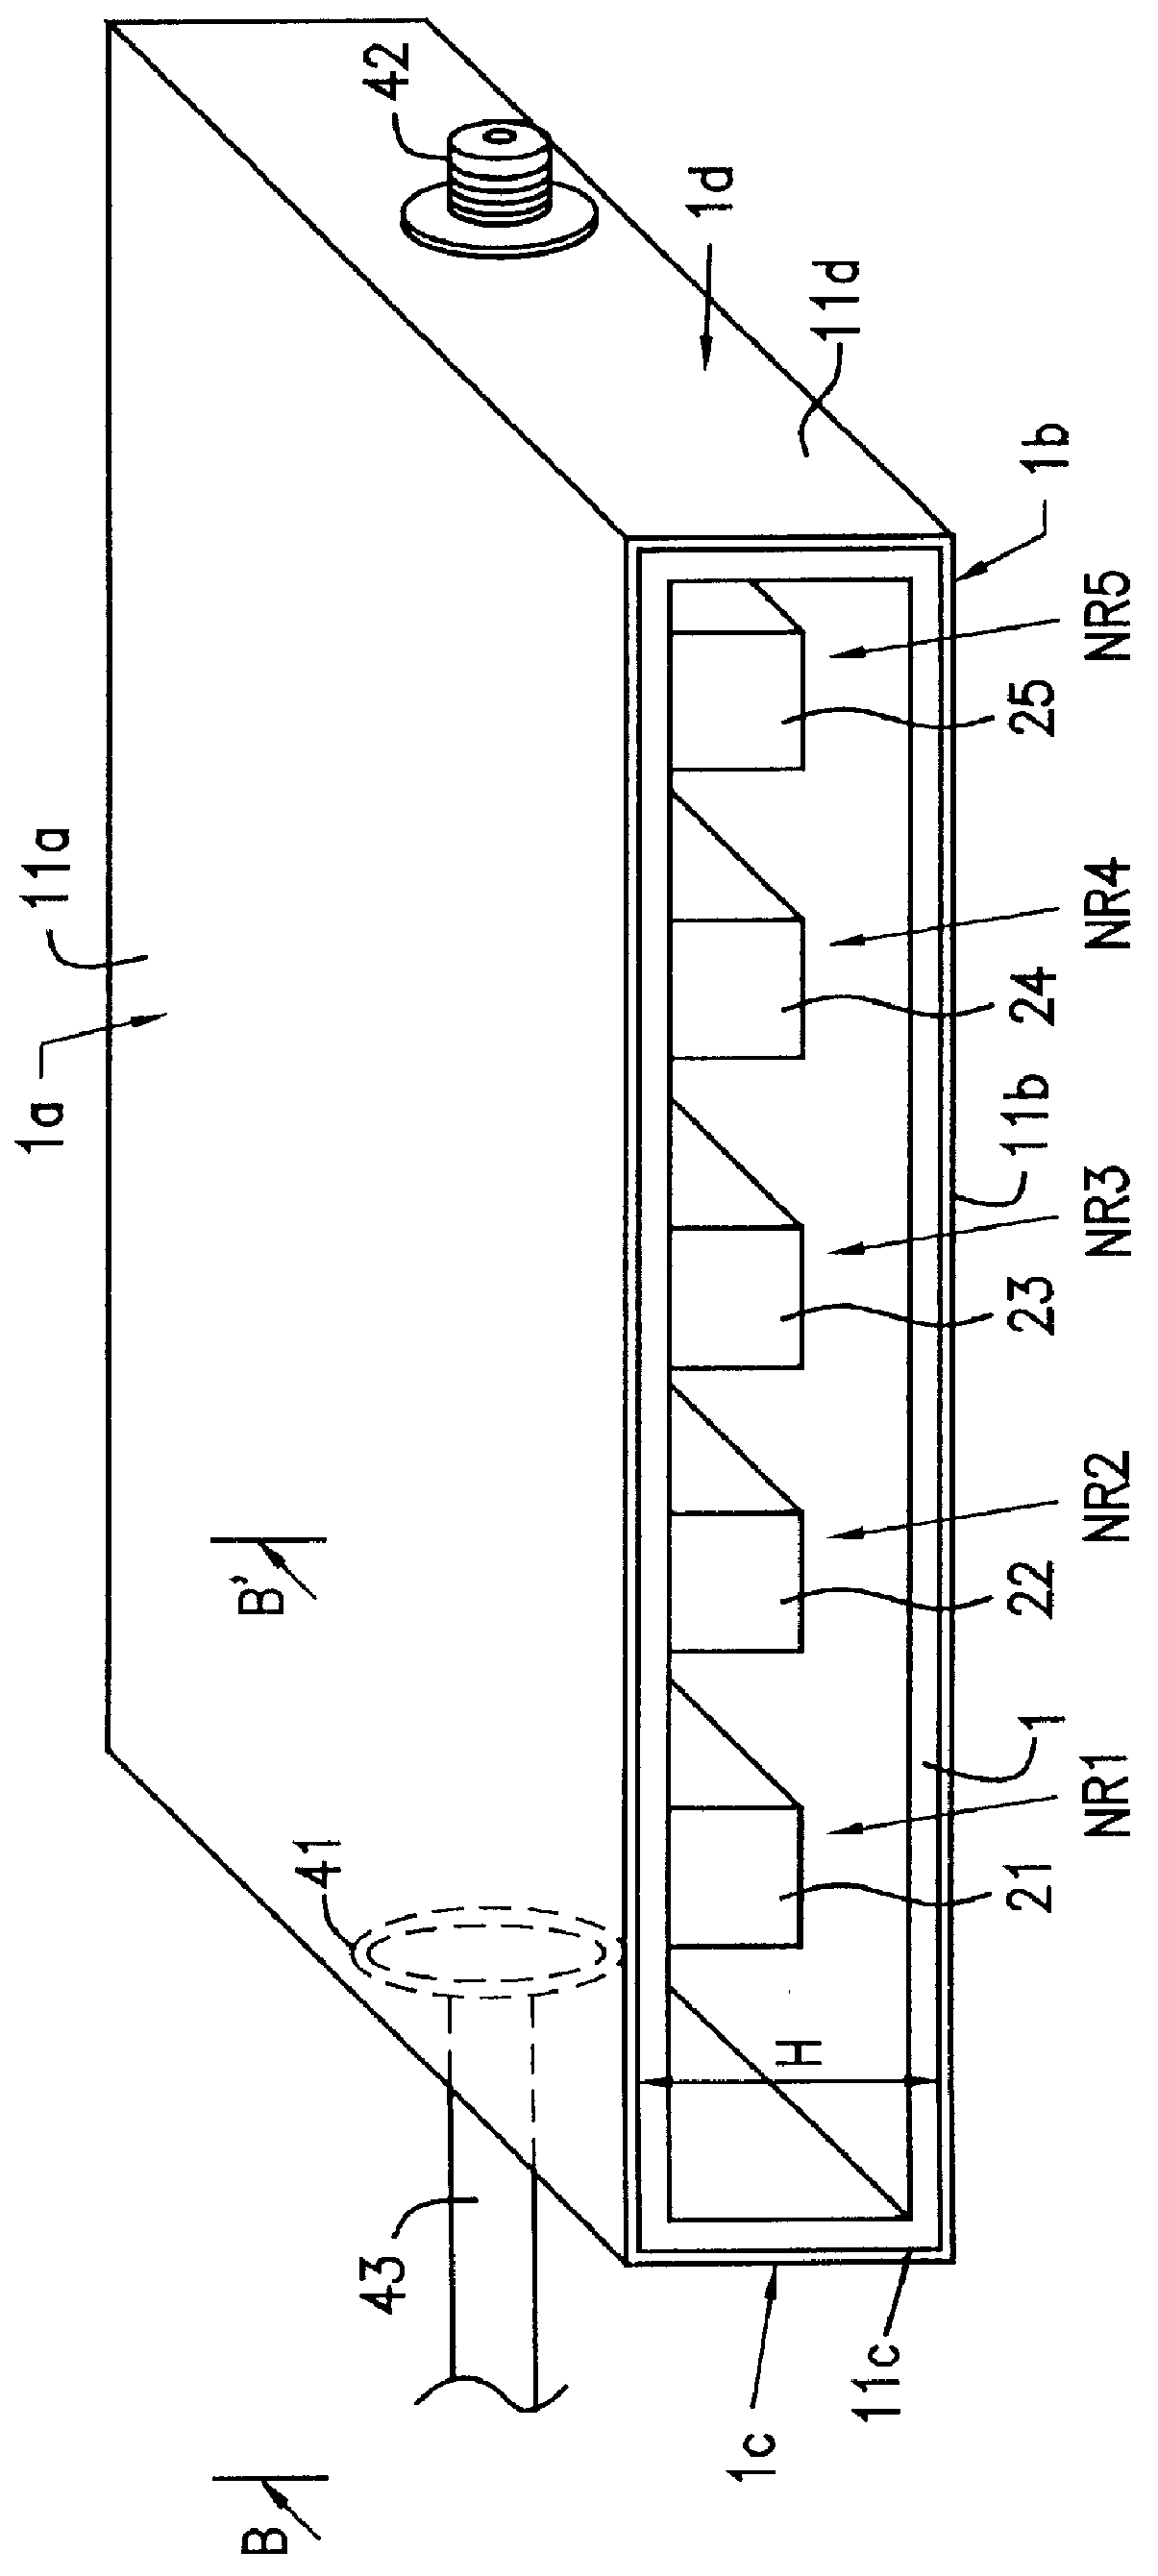 Band-pass filter apparatus using superconducting integrated nonradiative dielectric waveguide